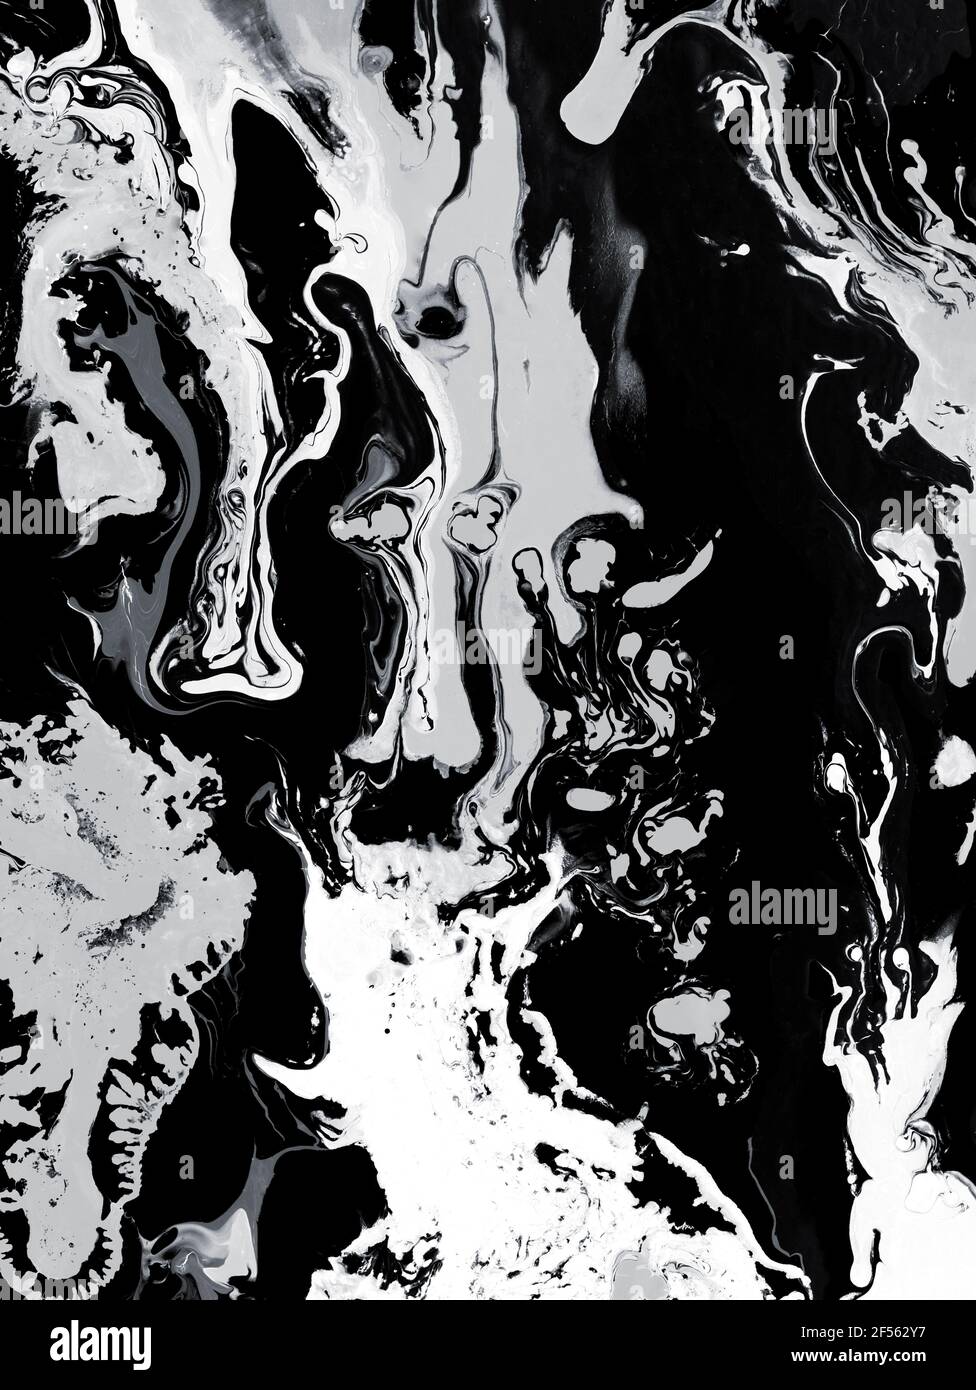 Premium Photo  Black and white acrylic paint texture with abstract shapes  for creative designs